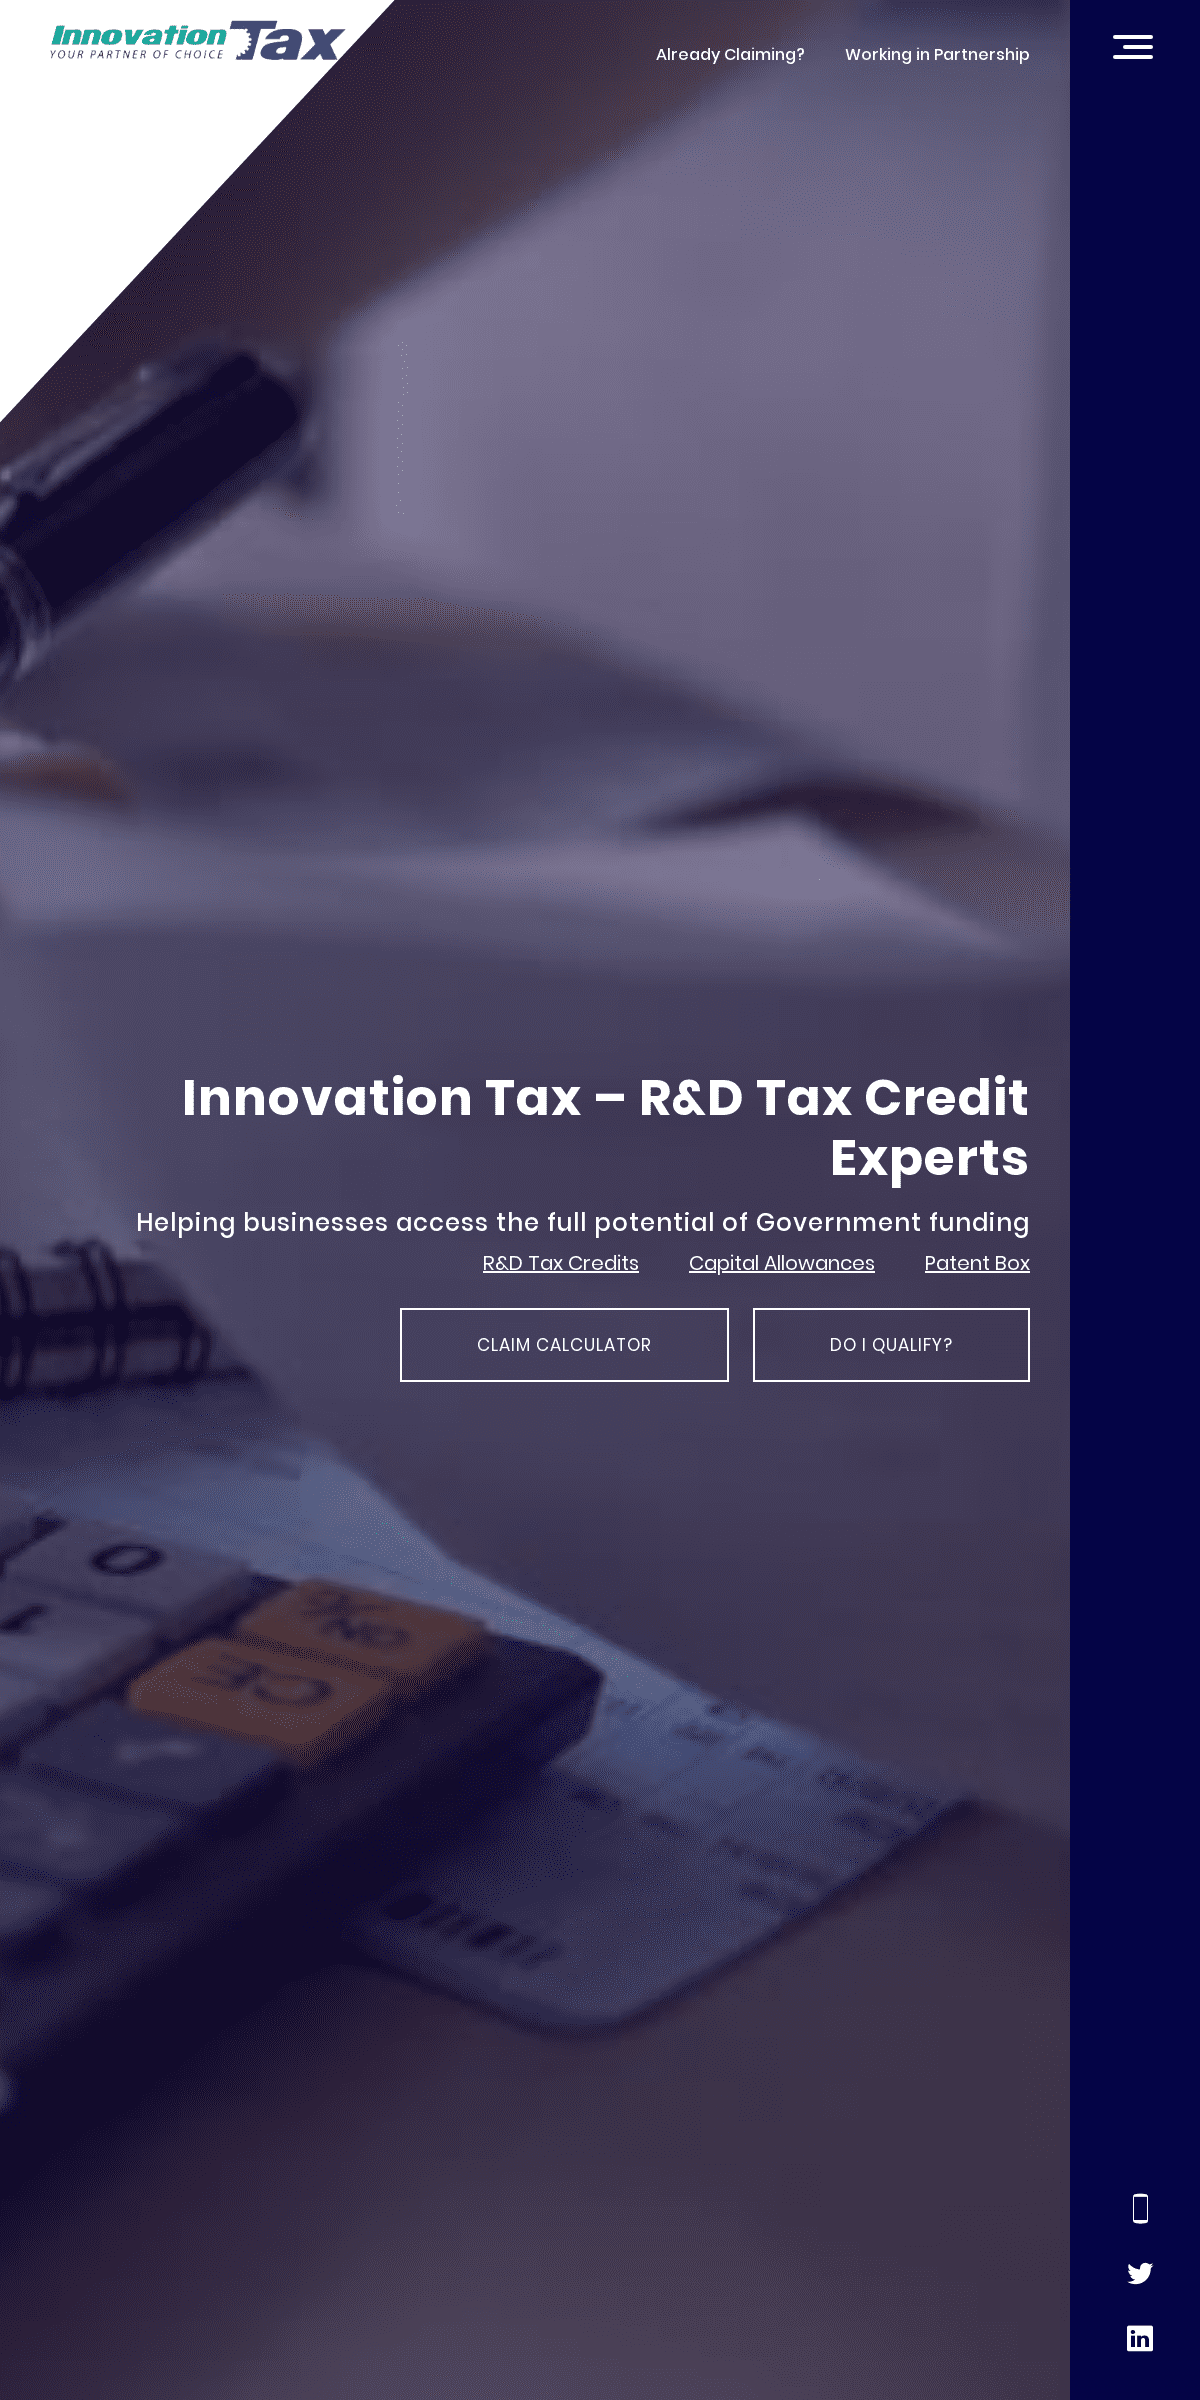 A complete backup of innovationtax.co.uk